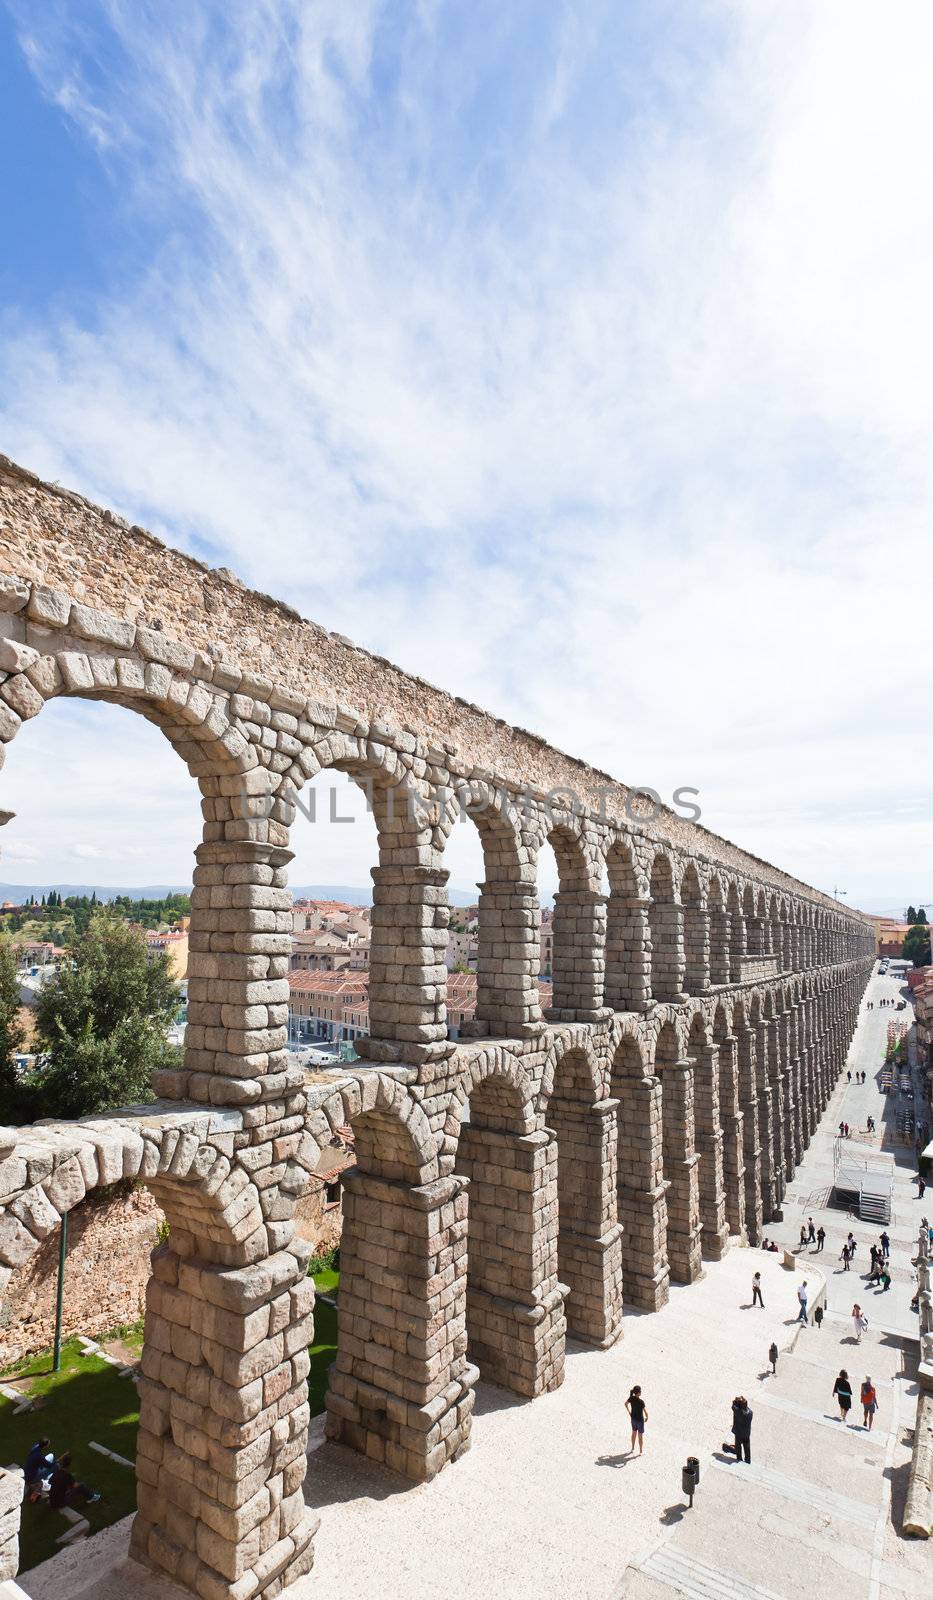 The ancient aqueduct in Segovia by gary718